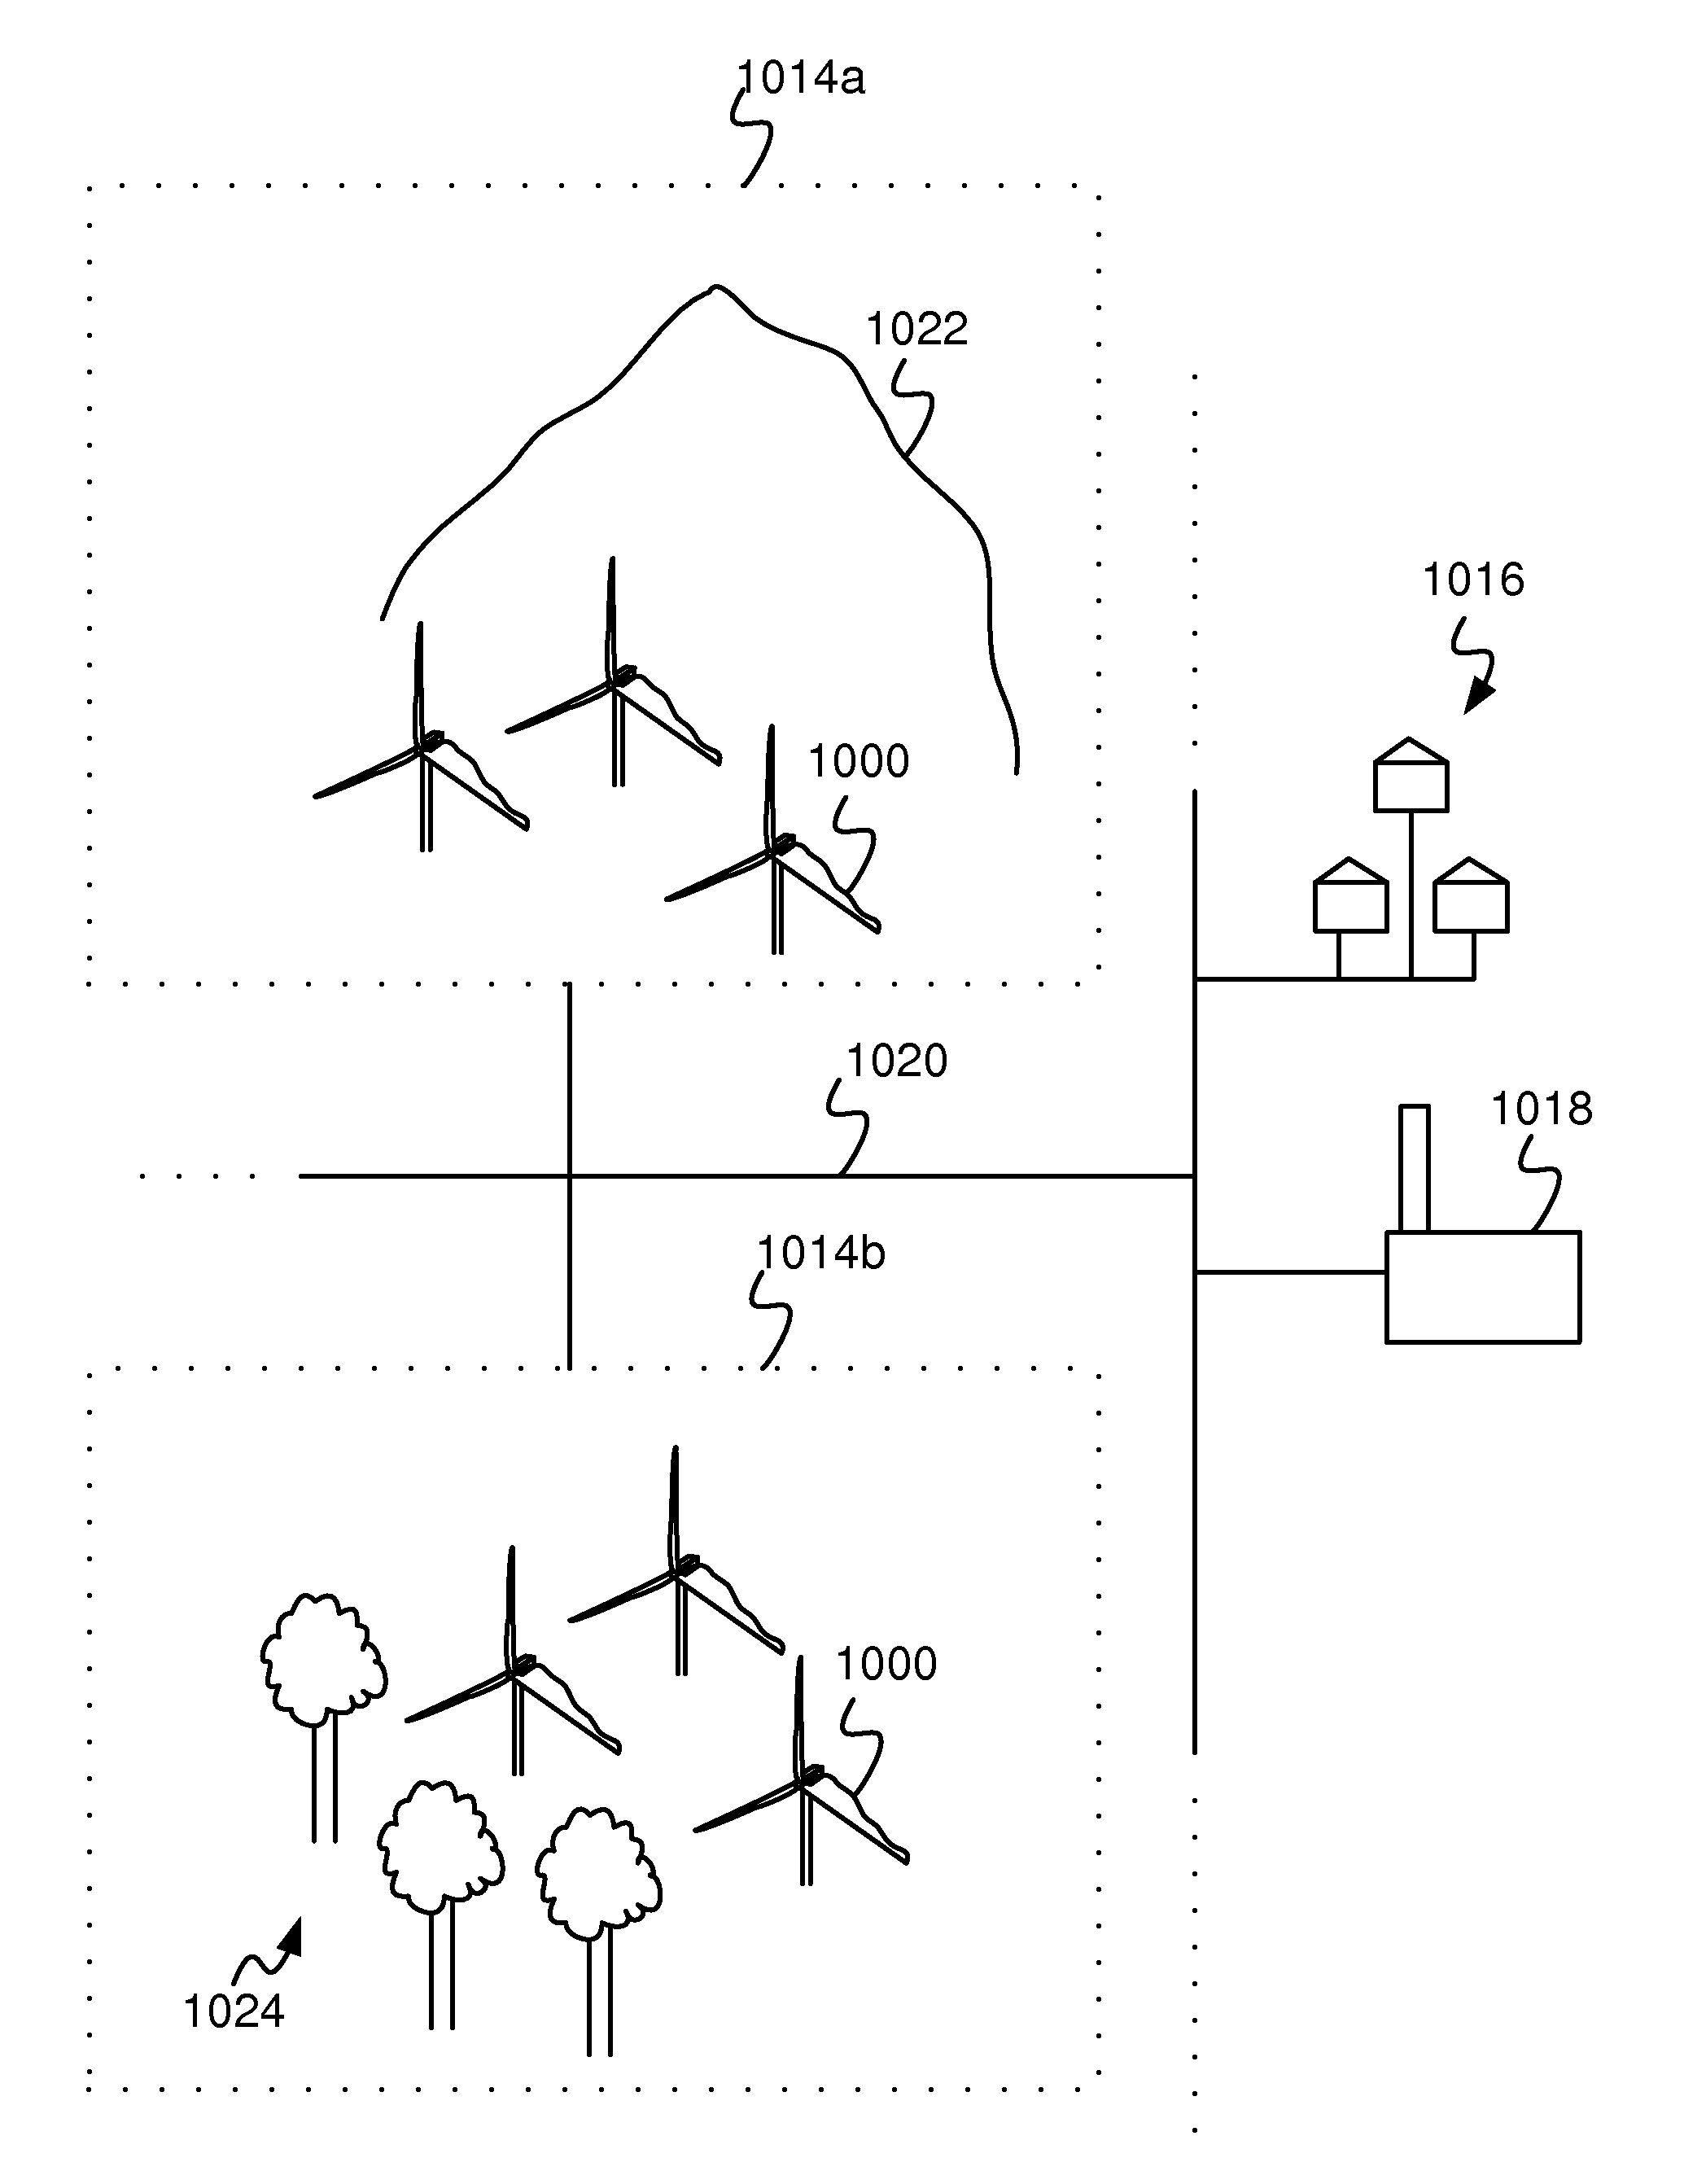 Method of controlling a wind power plant